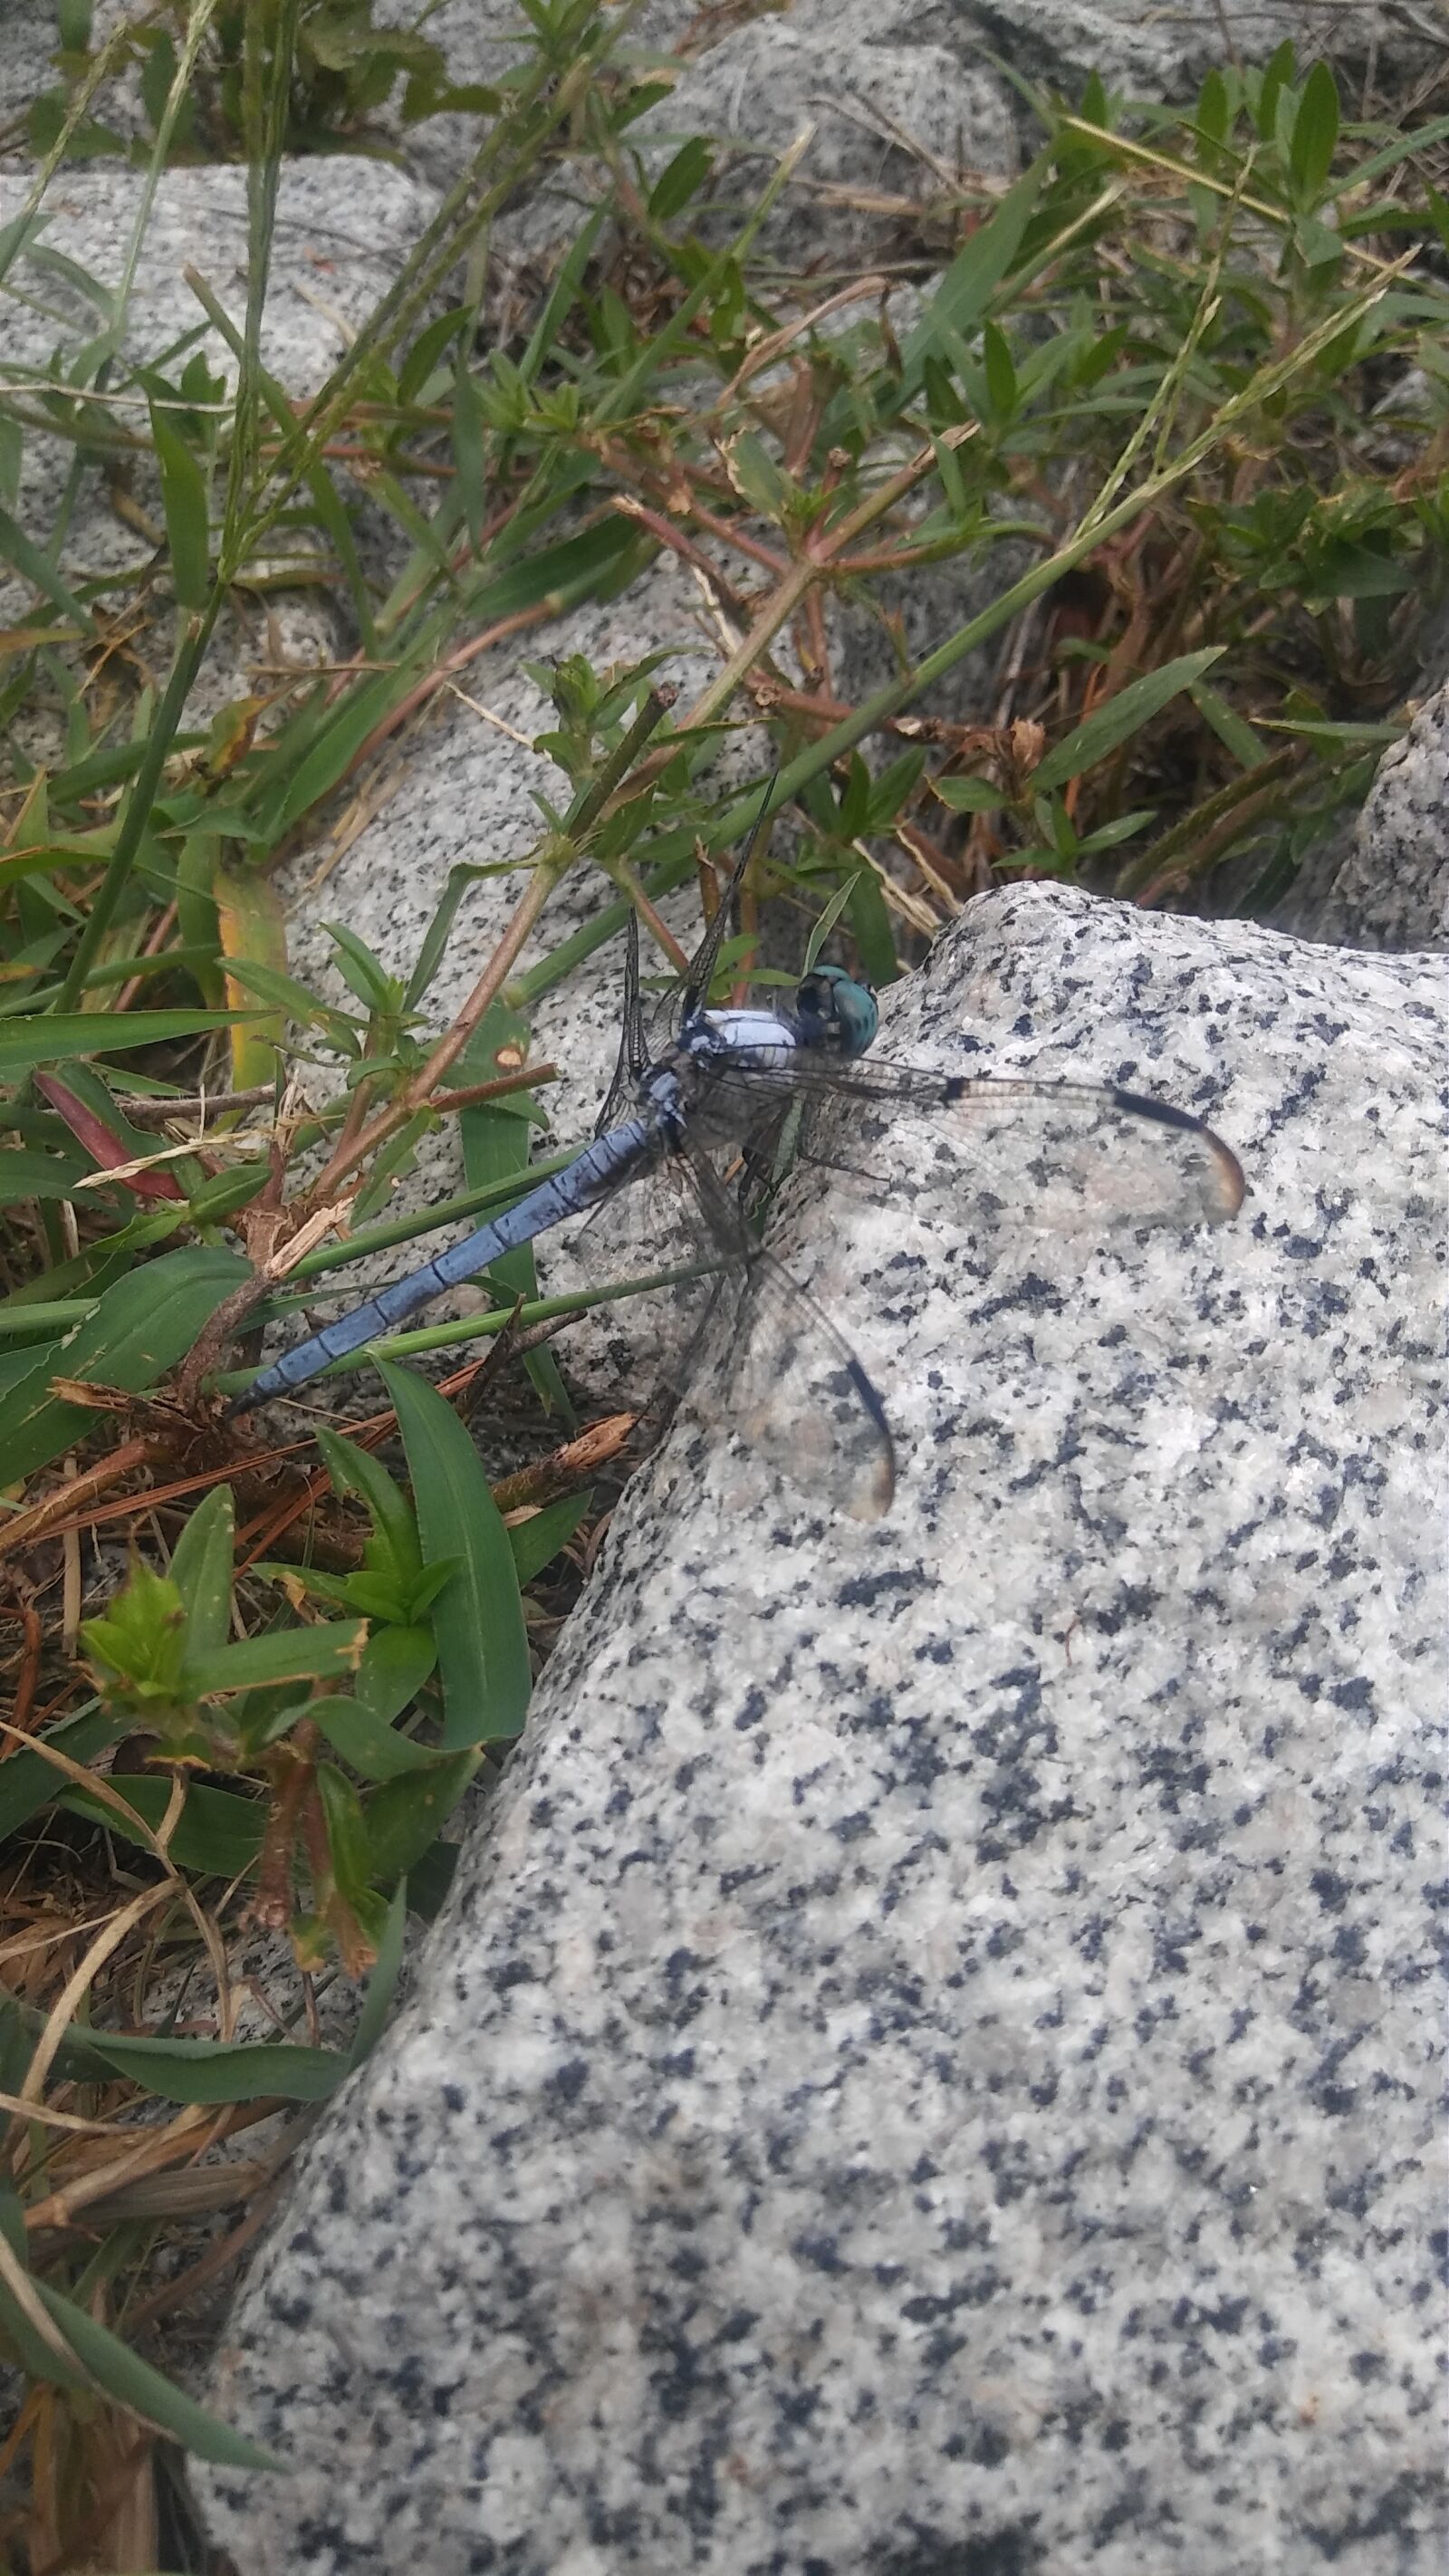 LG STYLO 2 PLUS sample photo. Bug, dragonflies, dragonfly, dragonfly photography